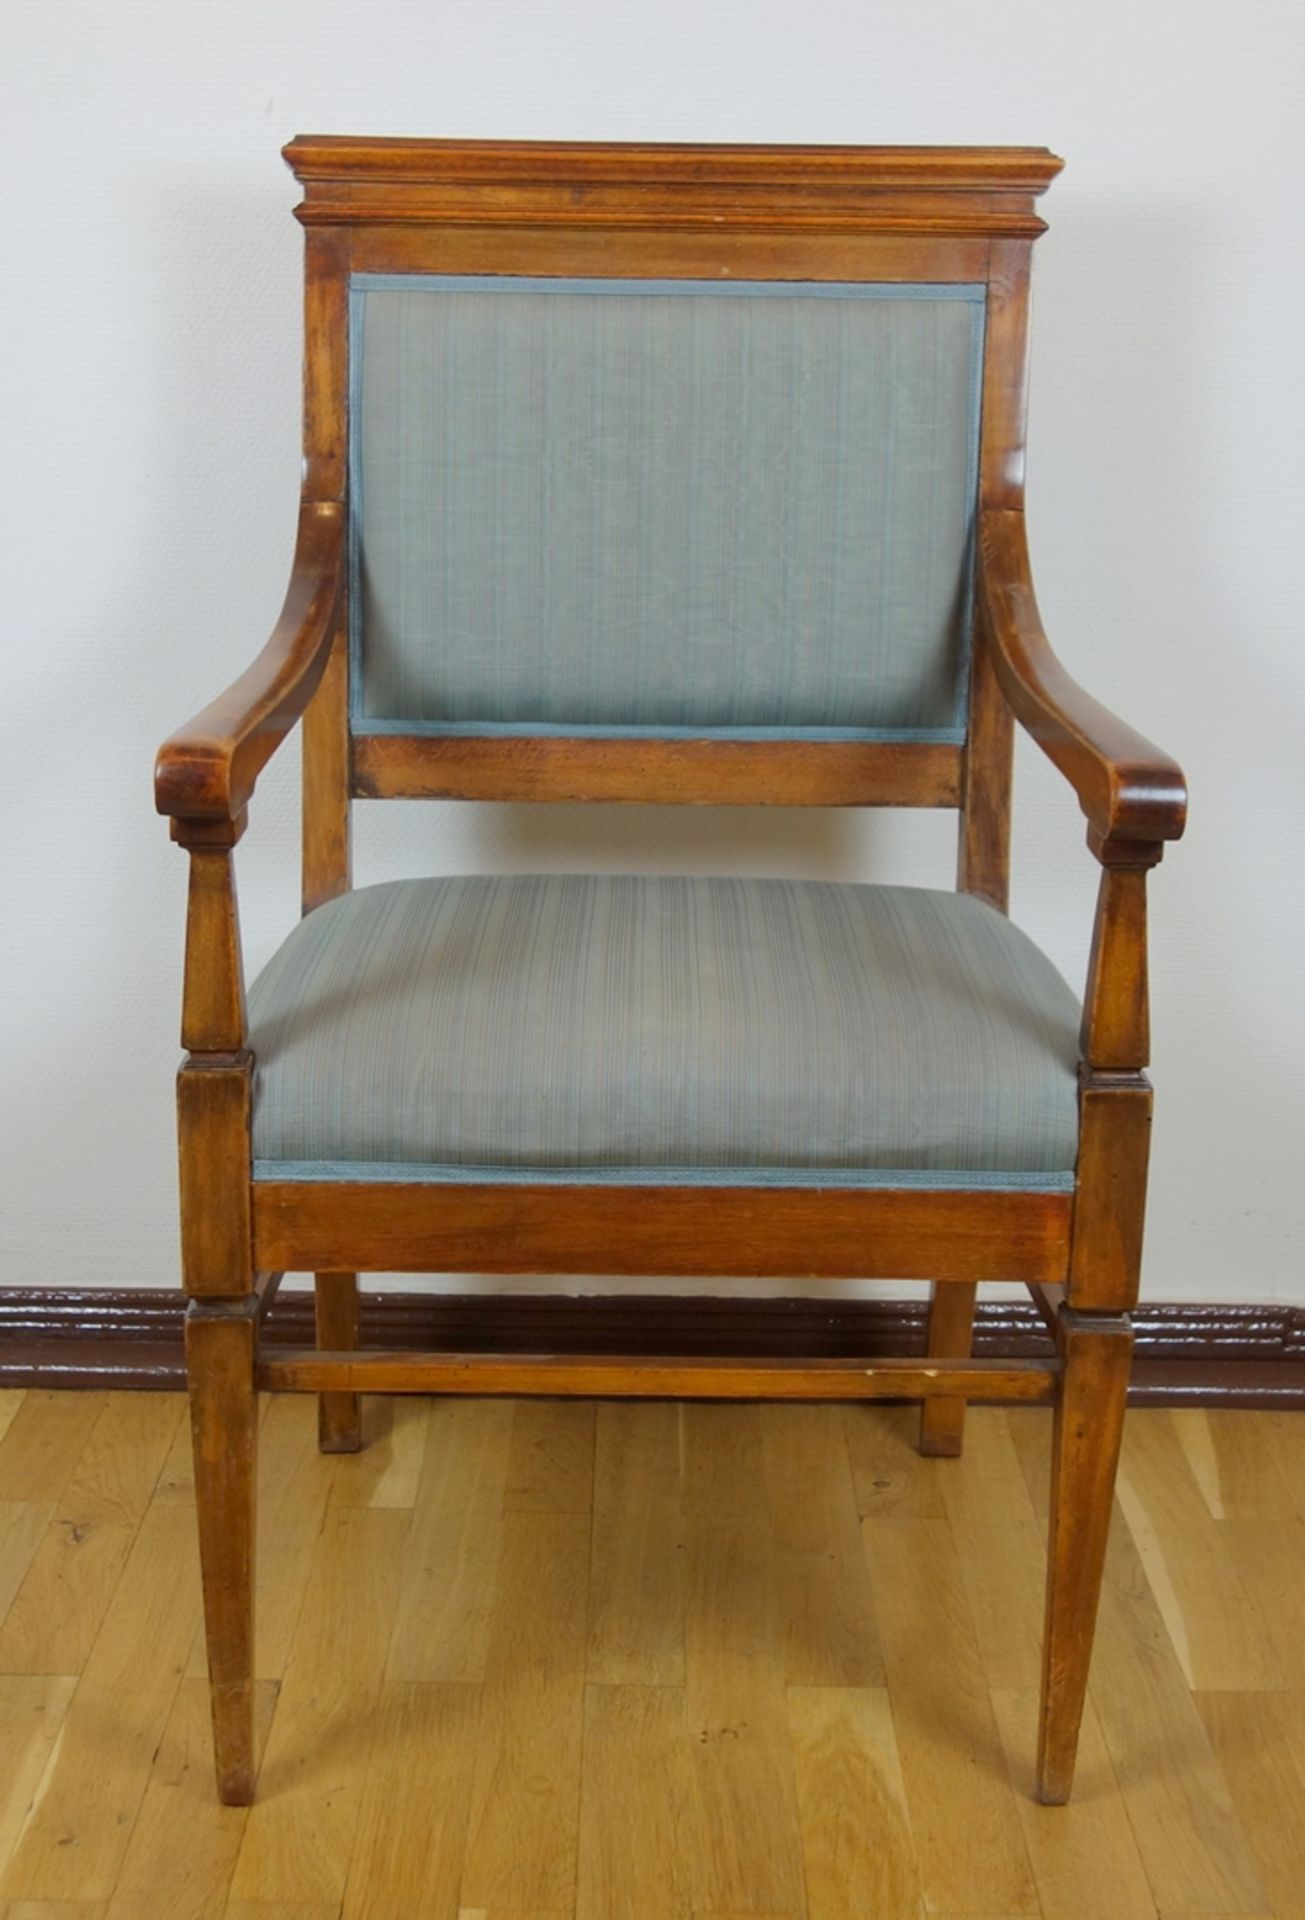 Desk chair with armrests, Empire style, 1920s - Image 2 of 4